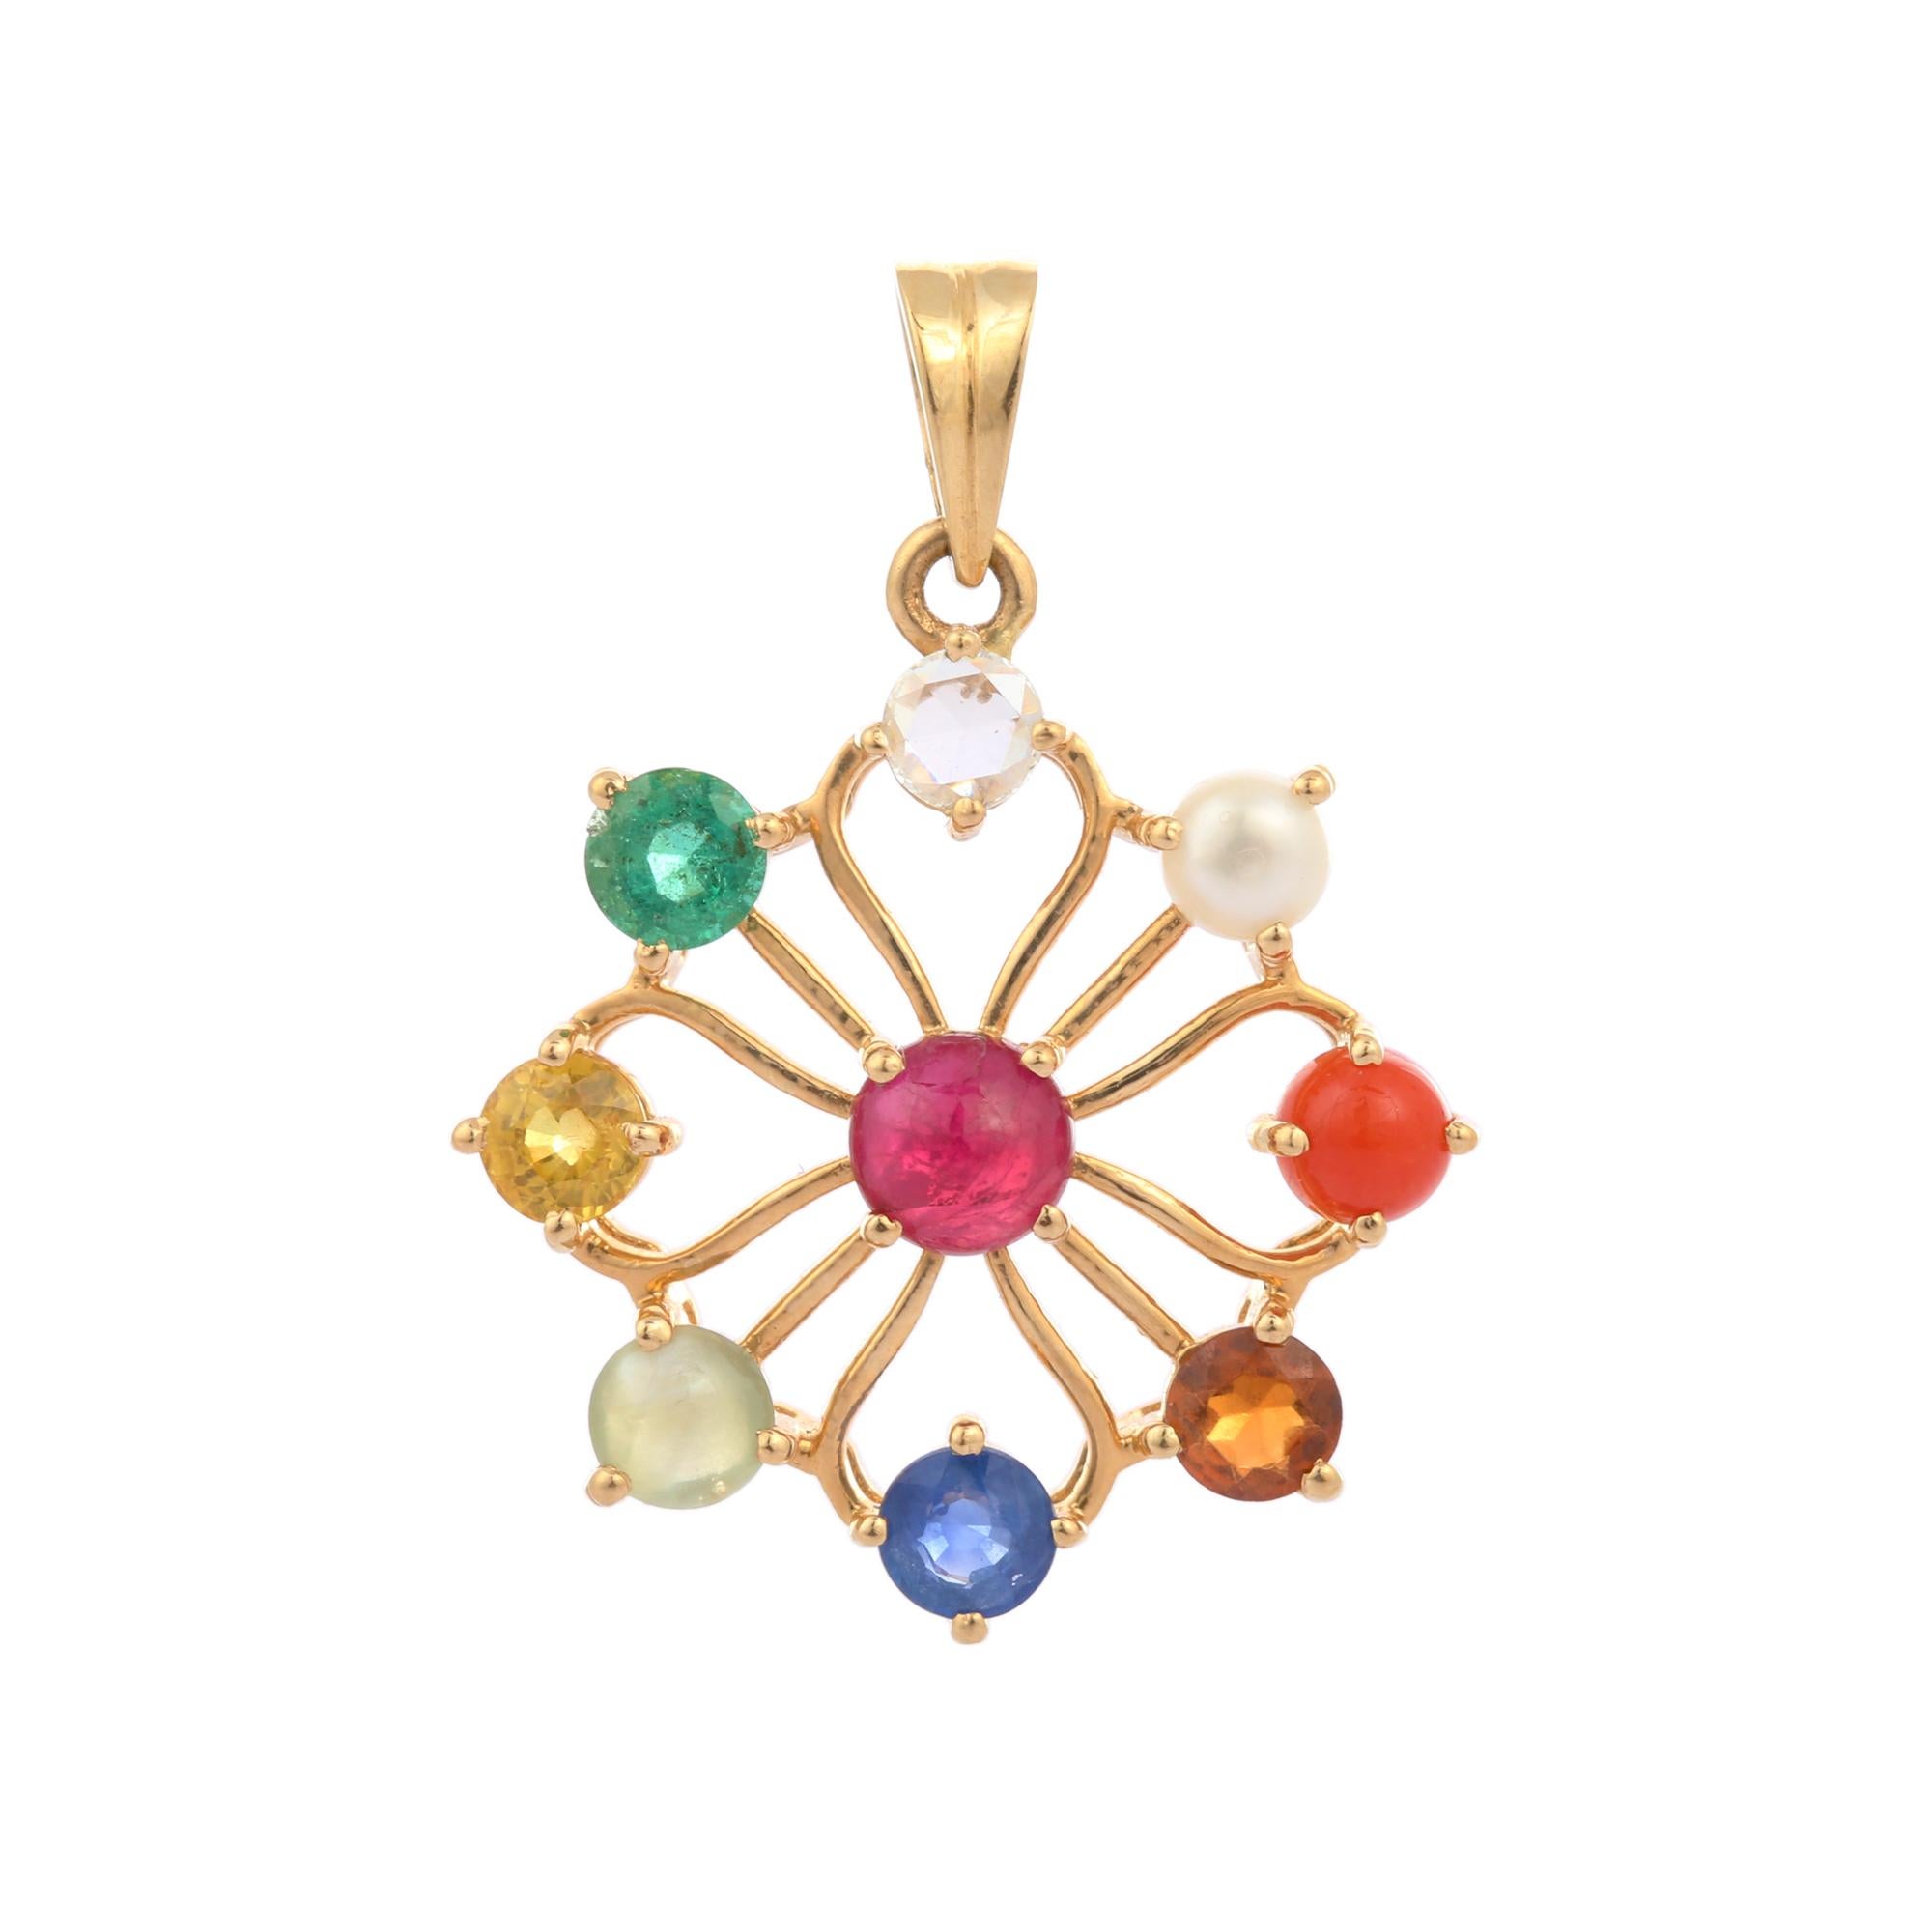 Navratna multi precious gemstones and diamond flower pendant in 18K Gold. It has round cut gemstone studded with diamond that completes your look with a decent touch. Pendants are used to wear or gifted to represent love and promises. It's an